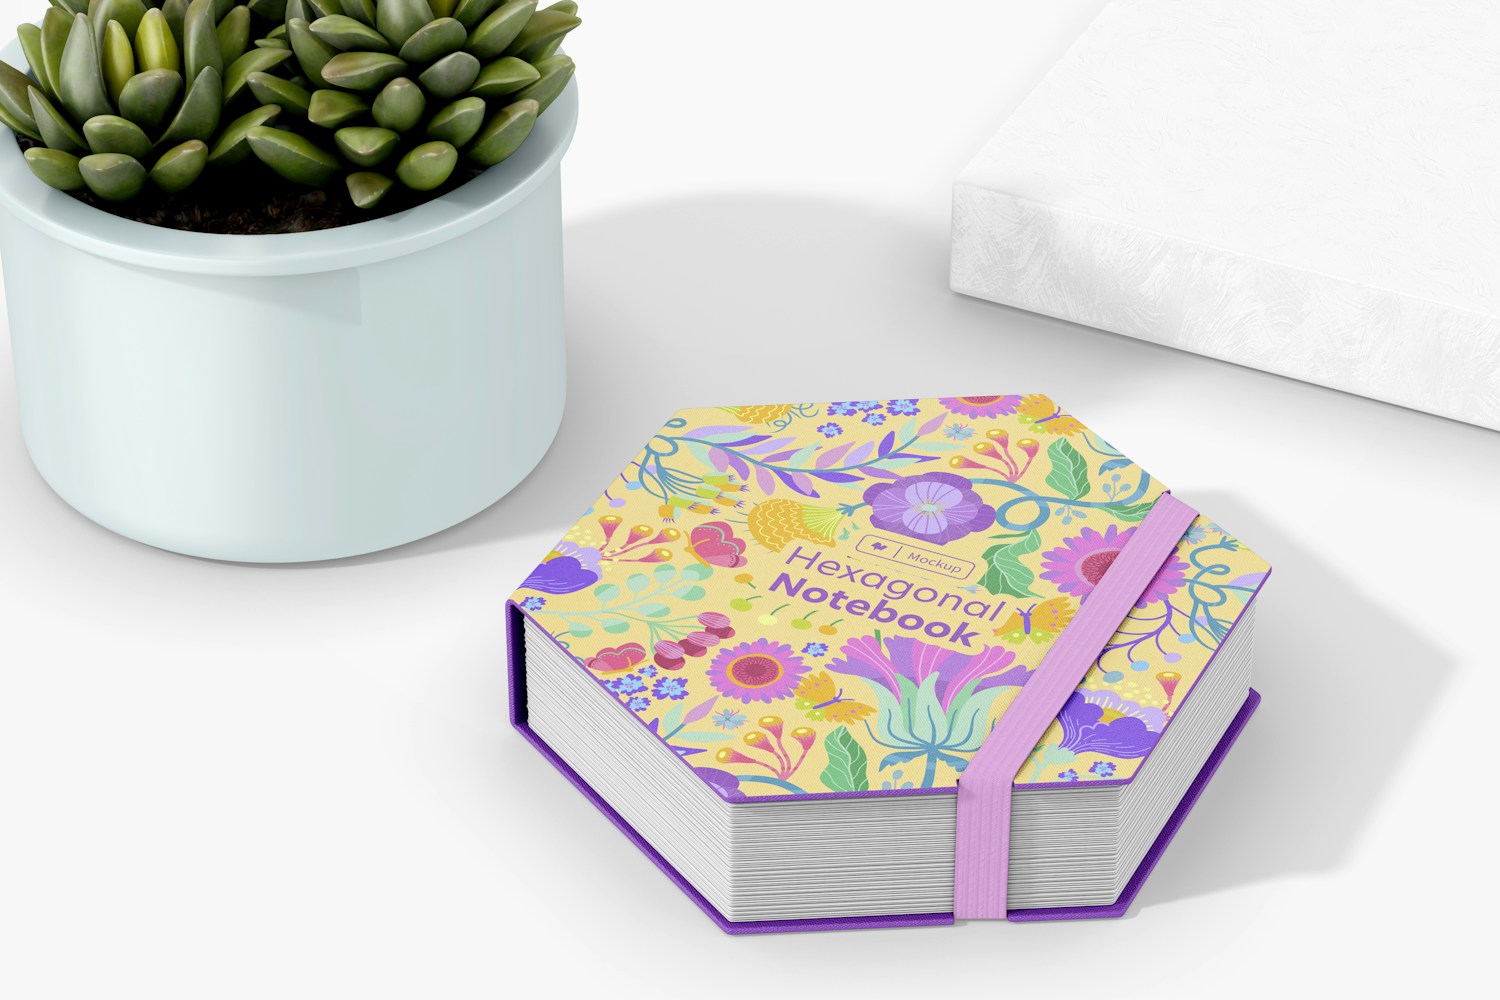 Hexagonal Notebook with Plant Pot Mockup